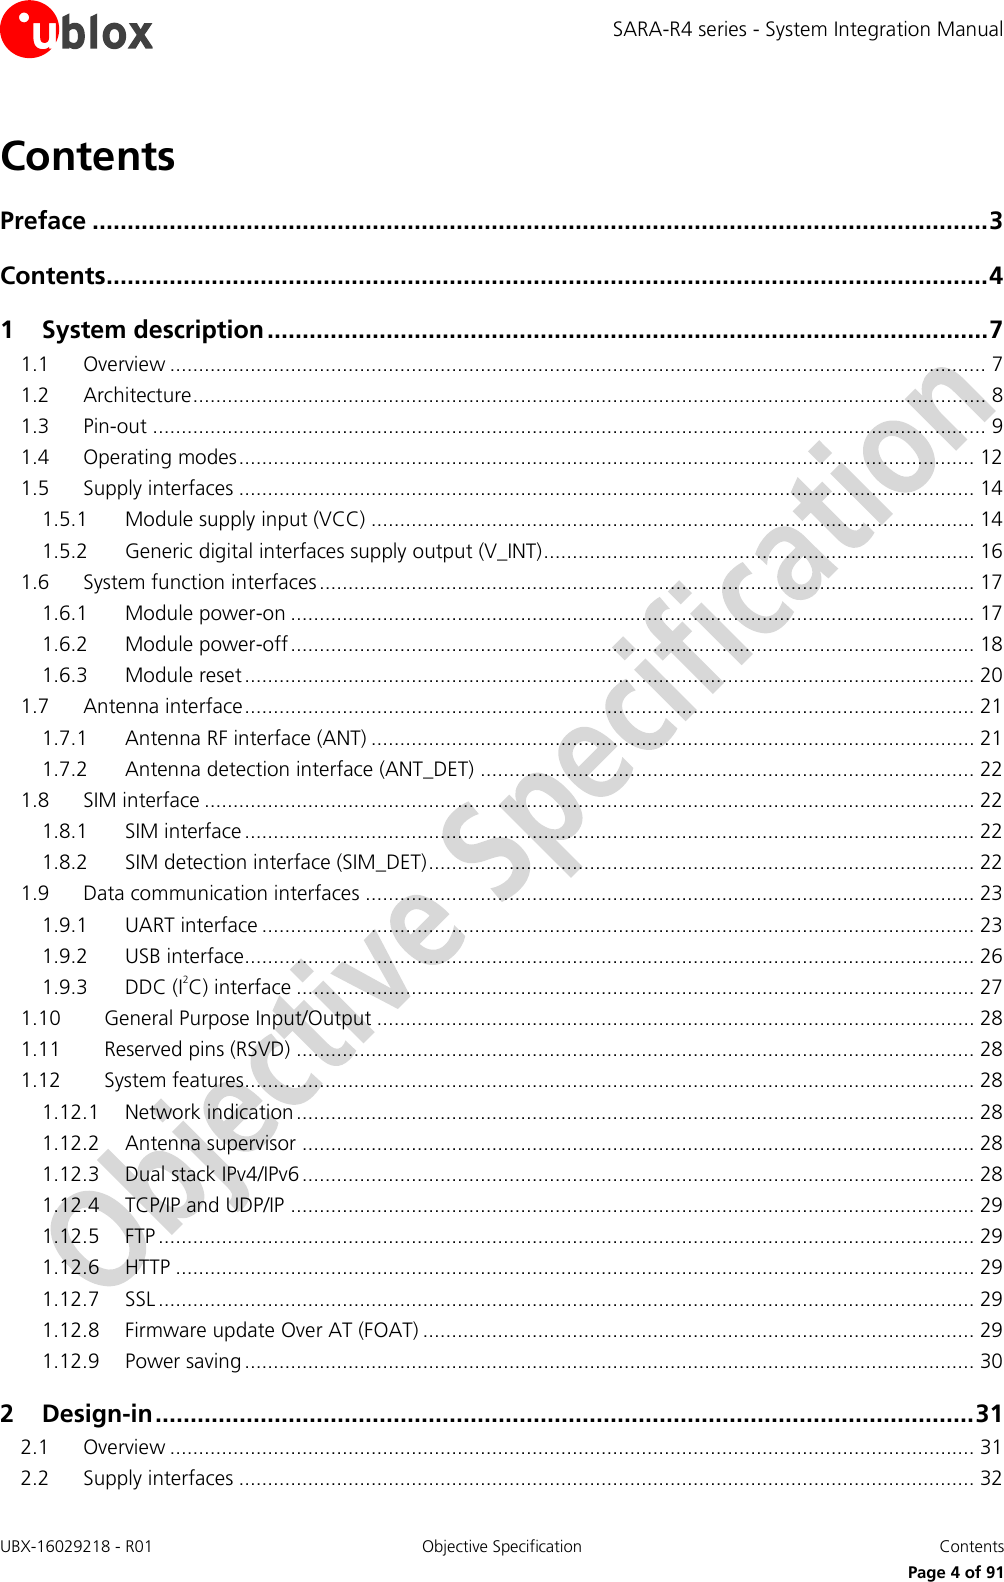 SARA-R4 series - System Integration Manual UBX-16029218 - R01  Objective Specification  Contents     Page 4 of 91 Contents Preface ................................................................................................................................ 3 Contents .............................................................................................................................. 4 1 System description ....................................................................................................... 7 1.1 Overview .............................................................................................................................................. 7 1.2 Architecture .......................................................................................................................................... 8 1.3 Pin-out ................................................................................................................................................. 9 1.4 Operating modes ................................................................................................................................ 12 1.5 Supply interfaces ................................................................................................................................ 14 1.5.1 Module supply input (VCC) ......................................................................................................... 14 1.5.2 Generic digital interfaces supply output (V_INT) ........................................................................... 16 1.6 System function interfaces .................................................................................................................. 17 1.6.1 Module power-on ....................................................................................................................... 17 1.6.2 Module power-off ....................................................................................................................... 18 1.6.3 Module reset ............................................................................................................................... 20 1.7 Antenna interface ............................................................................................................................... 21 1.7.1 Antenna RF interface (ANT) ......................................................................................................... 21 1.7.2 Antenna detection interface (ANT_DET) ...................................................................................... 22 1.8 SIM interface ...................................................................................................................................... 22 1.8.1 SIM interface ............................................................................................................................... 22 1.8.2 SIM detection interface (SIM_DET) ............................................................................................... 22 1.9 Data communication interfaces .......................................................................................................... 23 1.9.1 UART interface ............................................................................................................................ 23 1.9.2 USB interface............................................................................................................................... 26 1.9.3 DDC (I2C) interface ...................................................................................................................... 27 1.10 General Purpose Input/Output ........................................................................................................ 28 1.11 Reserved pins (RSVD) ...................................................................................................................... 28 1.12 System features............................................................................................................................... 28 1.12.1 Network indication ...................................................................................................................... 28 1.12.2 Antenna supervisor ..................................................................................................................... 28 1.12.3 Dual stack IPv4/IPv6 ..................................................................................................................... 28 1.12.4 TCP/IP and UDP/IP ....................................................................................................................... 29 1.12.5 FTP .............................................................................................................................................. 29 1.12.6 HTTP ........................................................................................................................................... 29 1.12.7 SSL .............................................................................................................................................. 29 1.12.8 Firmware update Over AT (FOAT) ................................................................................................ 29 1.12.9 Power saving ............................................................................................................................... 30 2 Design-in ..................................................................................................................... 31 2.1 Overview ............................................................................................................................................ 31 2.2 Supply interfaces ................................................................................................................................ 32 